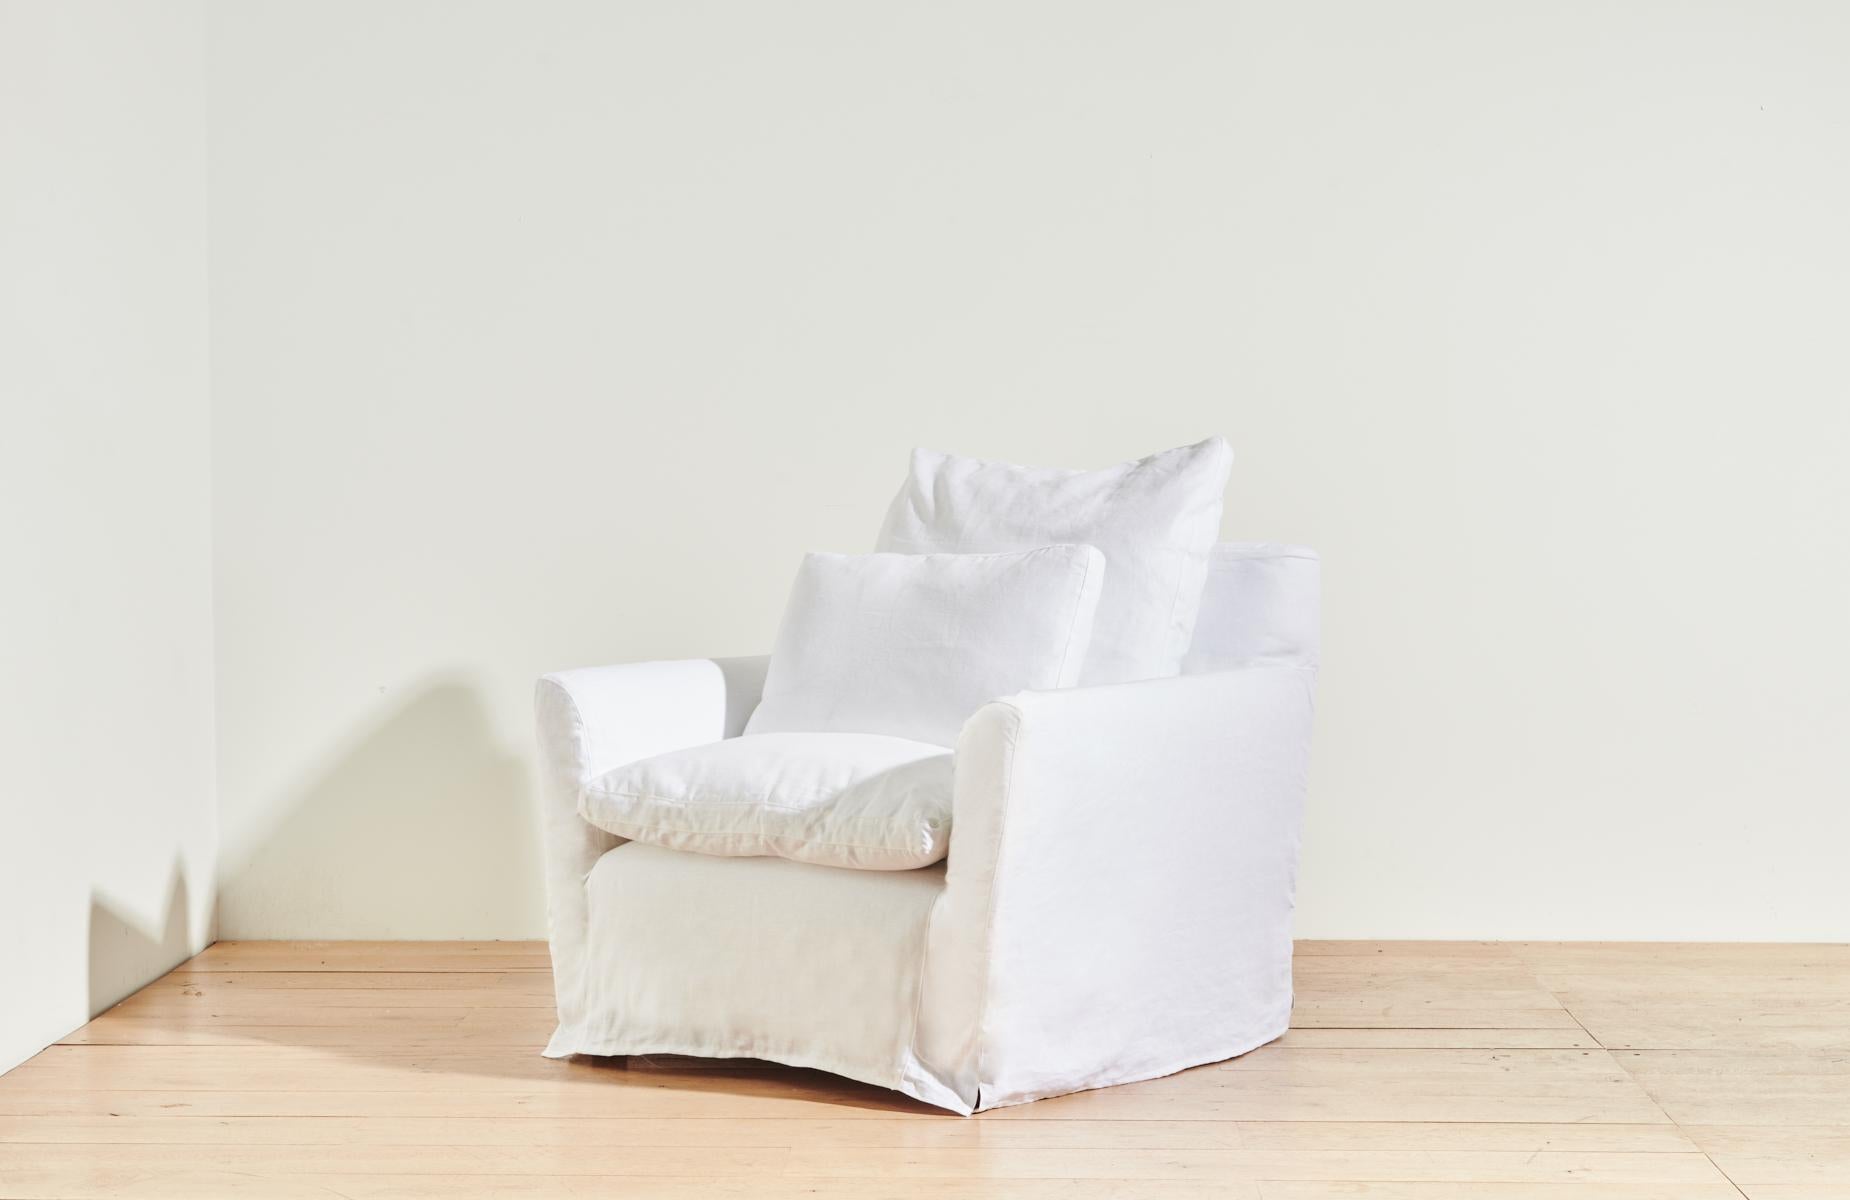 The Cisco Brothers slipcovered Donato Chair in Otis White linen combines comfort, quality craftsmanship, and durable, eco-friendly manufacturing to result in a stylish organic modern lounge chair for your living room. 

Cisco is considered one of